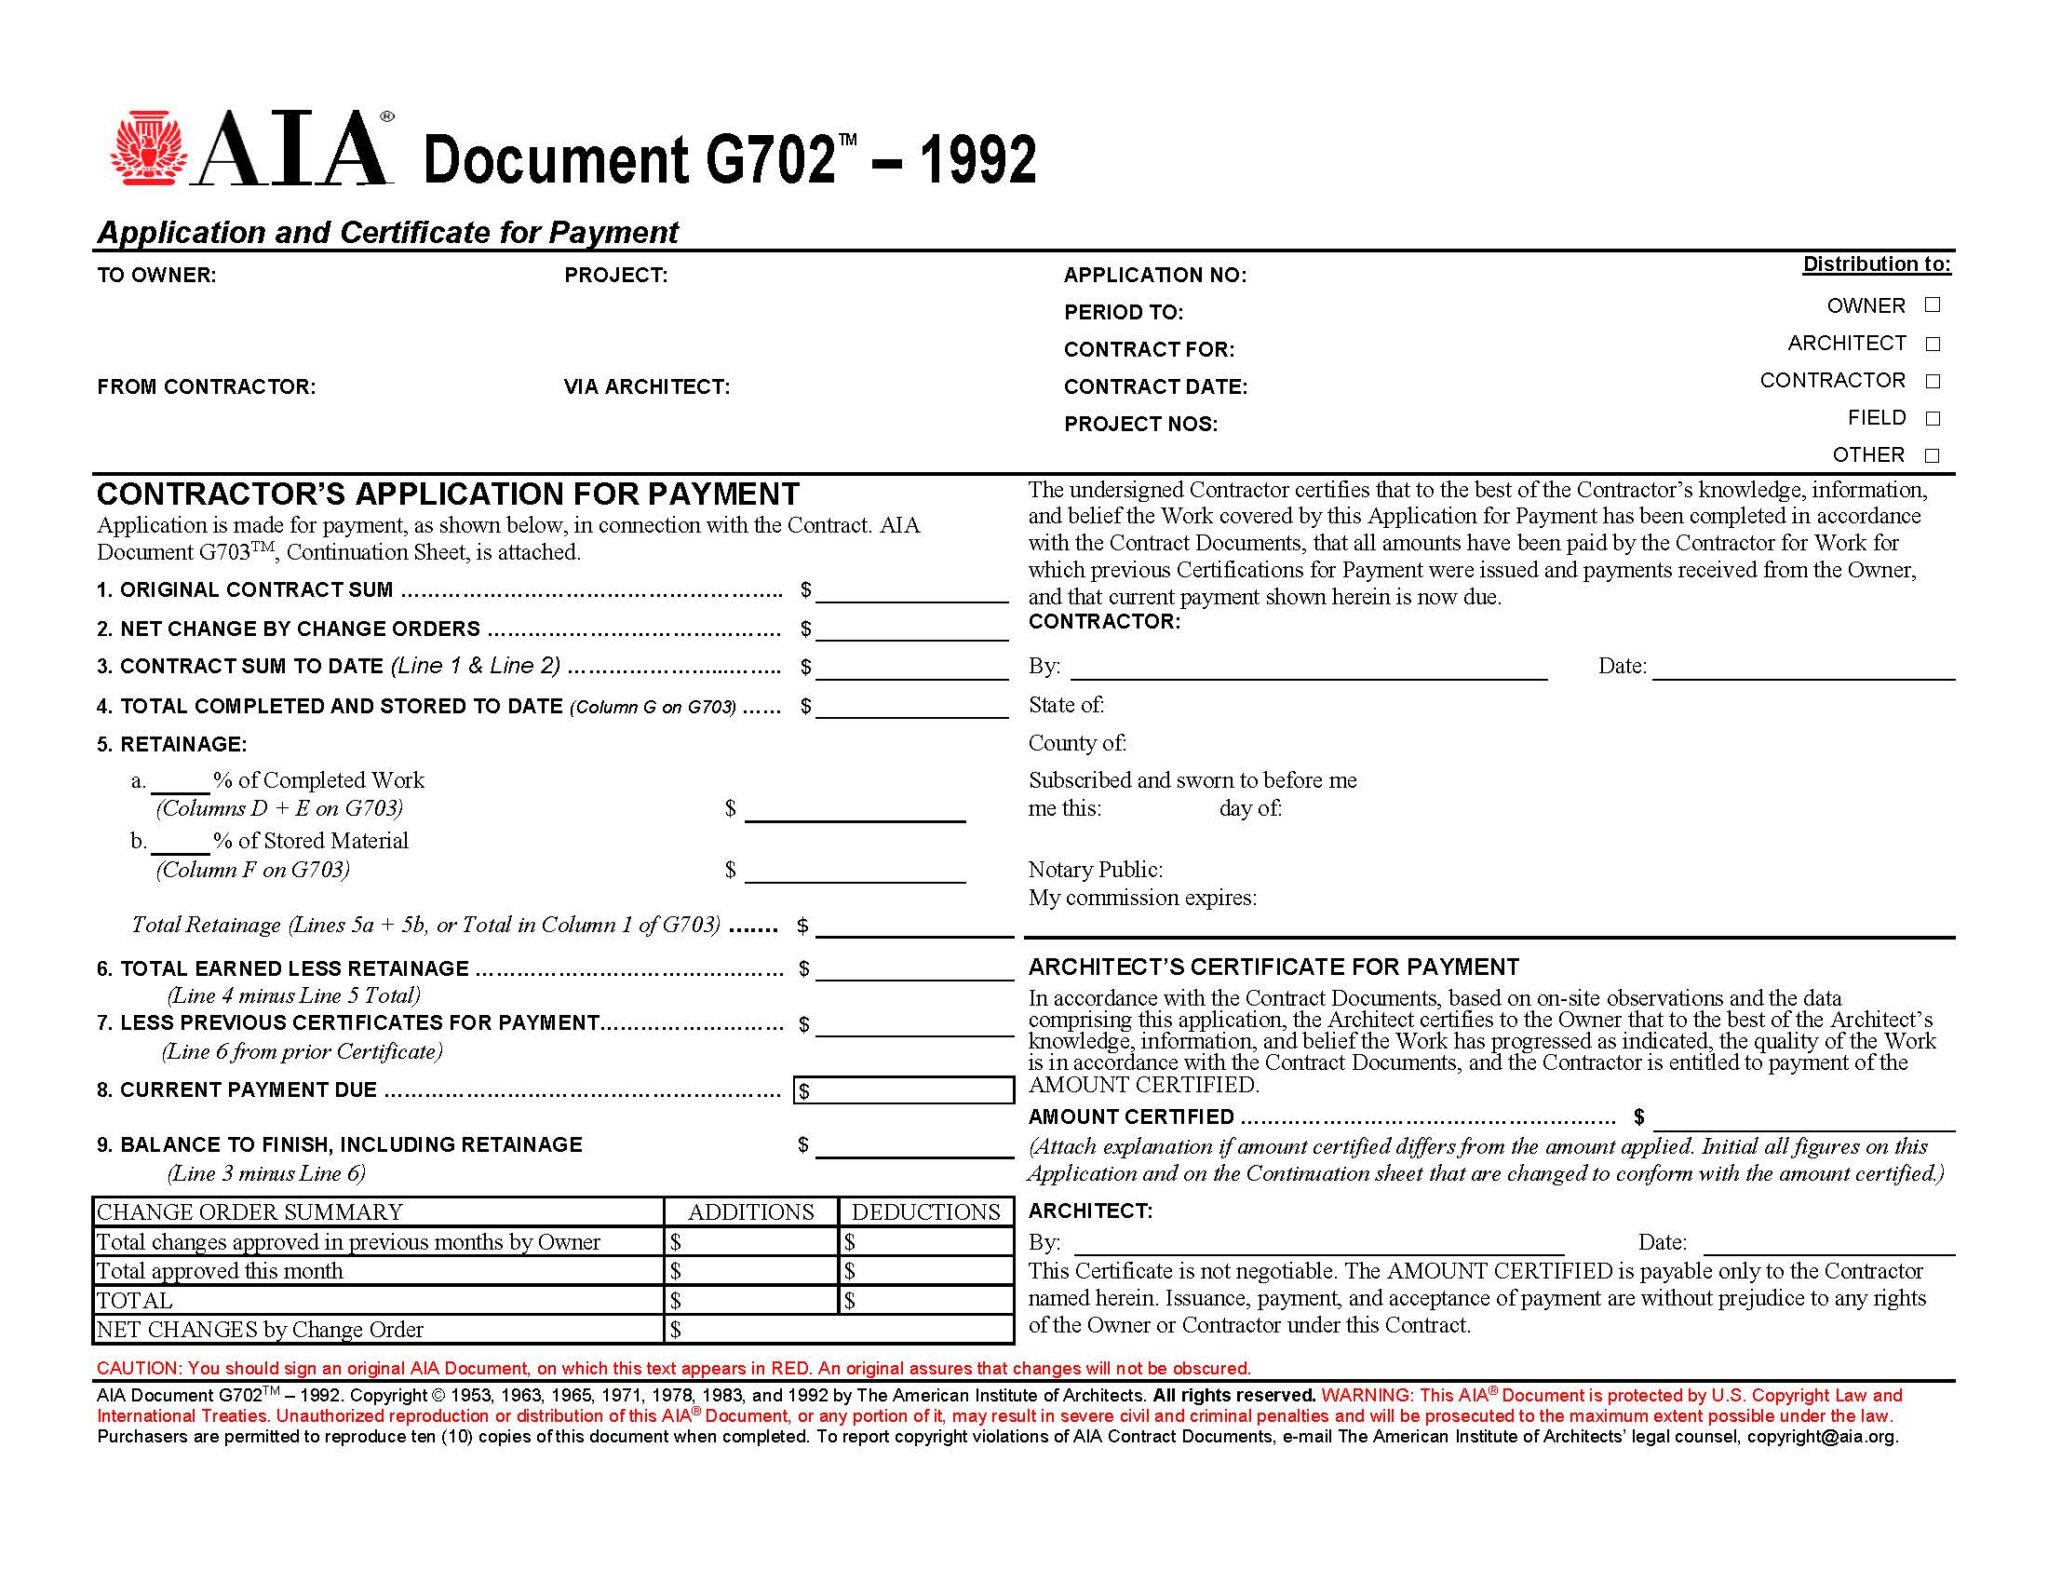 Aia Forms G702 & G703 Application, Certificate, And Continuation In